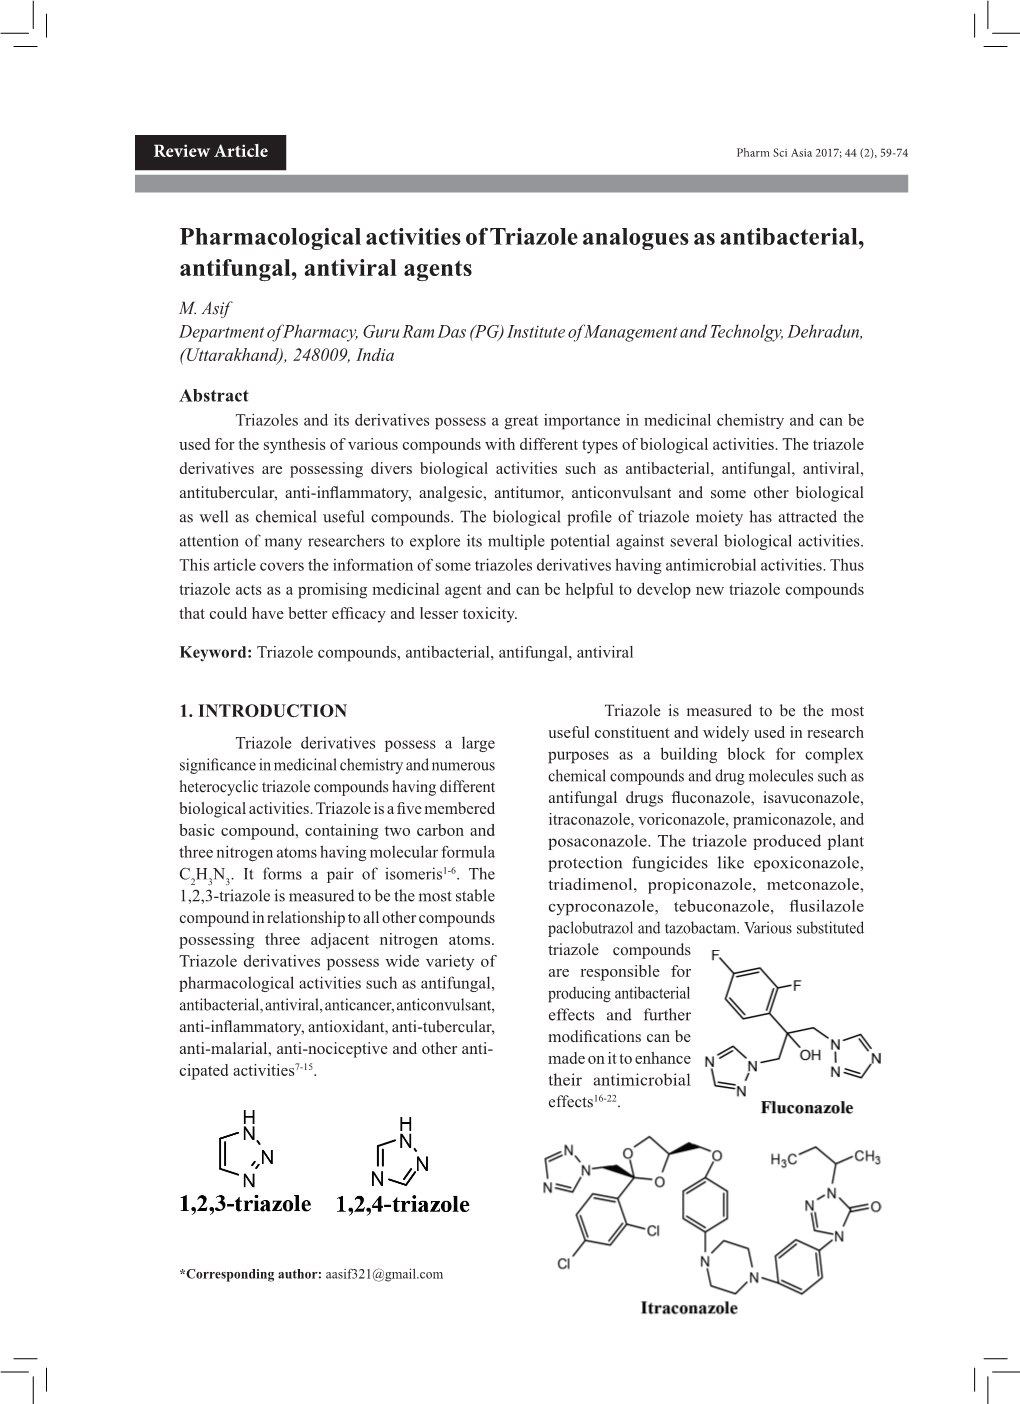 Pharmacological Activities of Triazole Analogues As Antibacterial, Antifungal, Antiviral Agents M